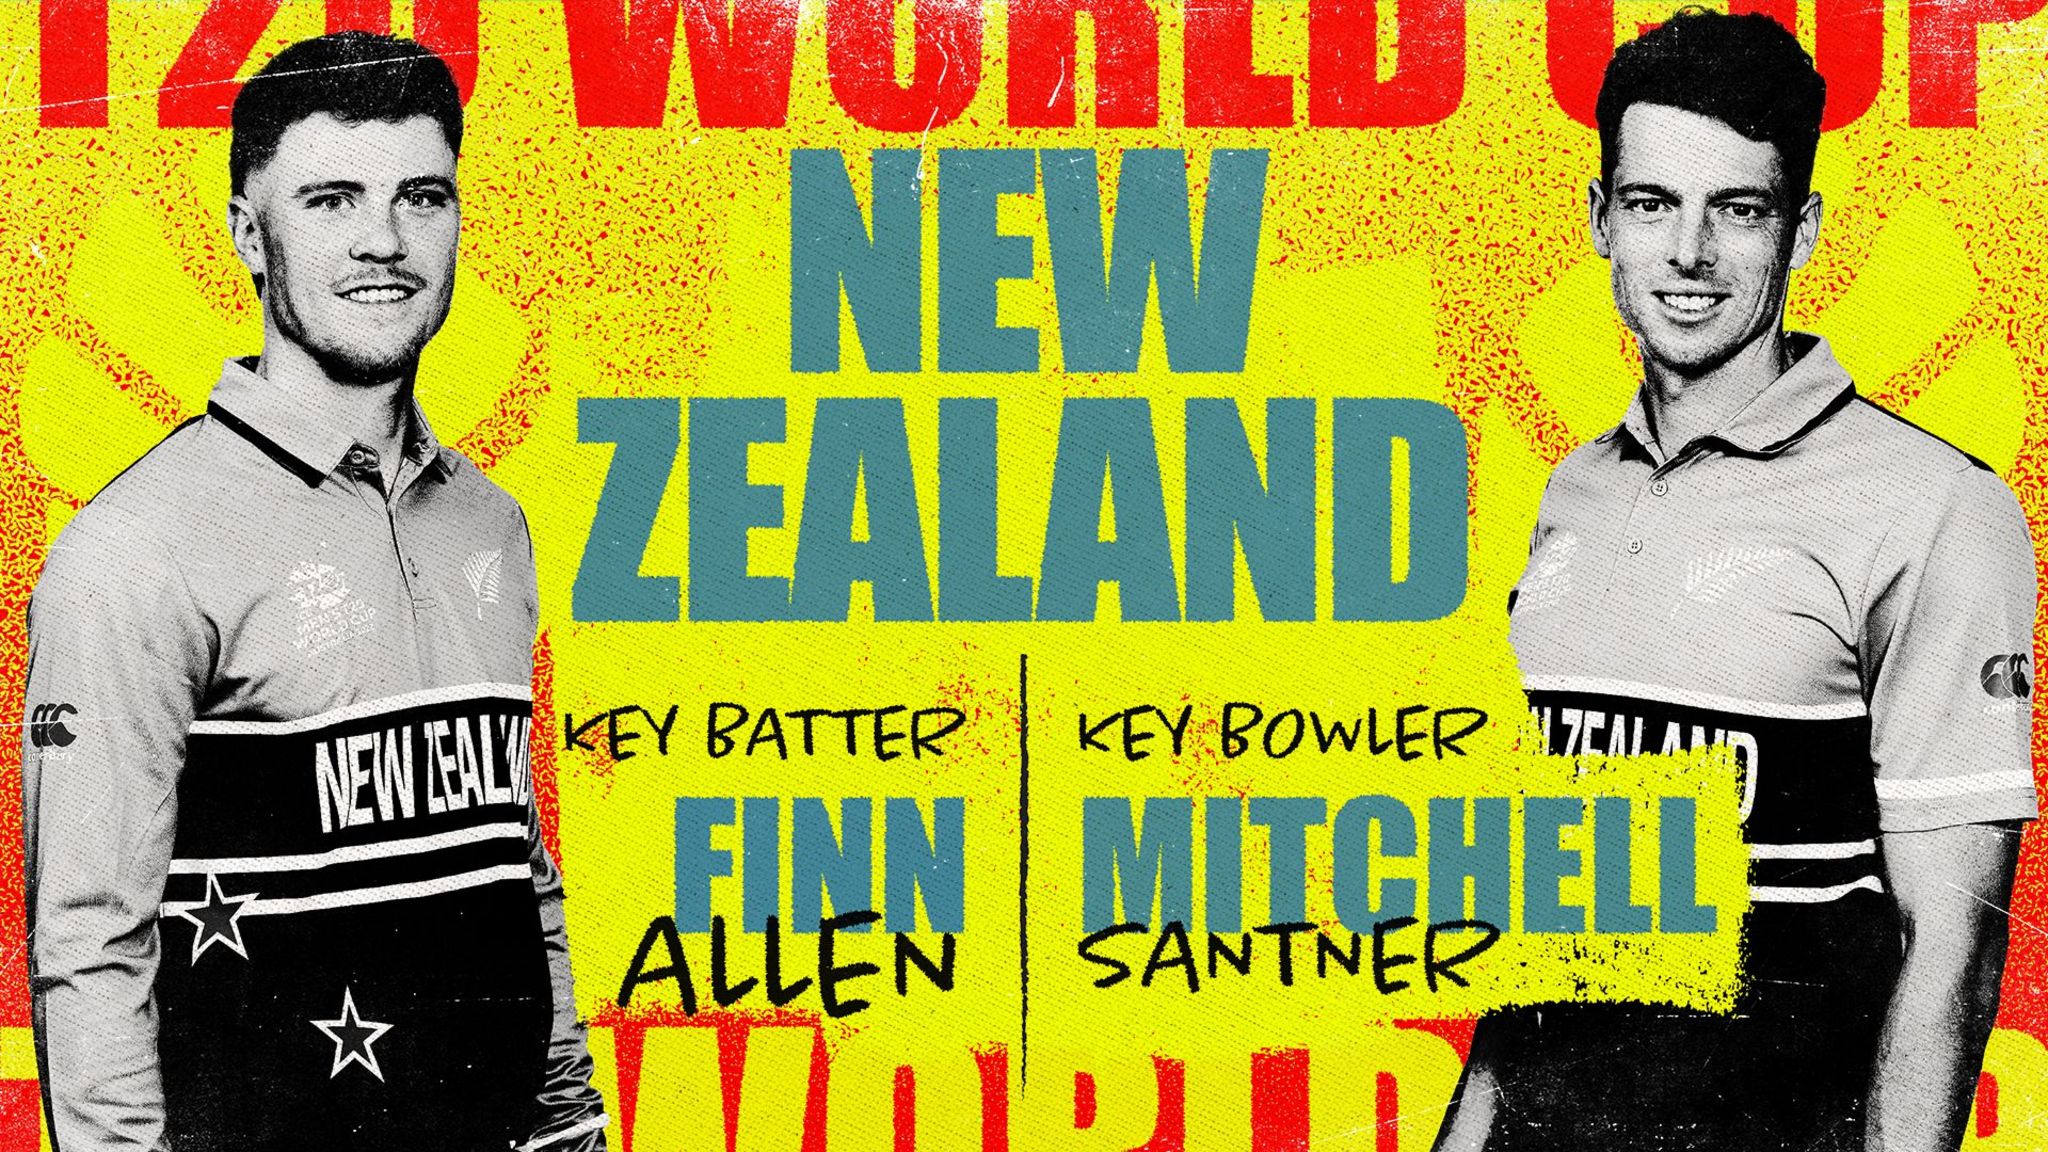 A graphic showing Finn Allen and Mitchell Santner as New Zealand's key batter and bowler at the Men's T20 World Cup